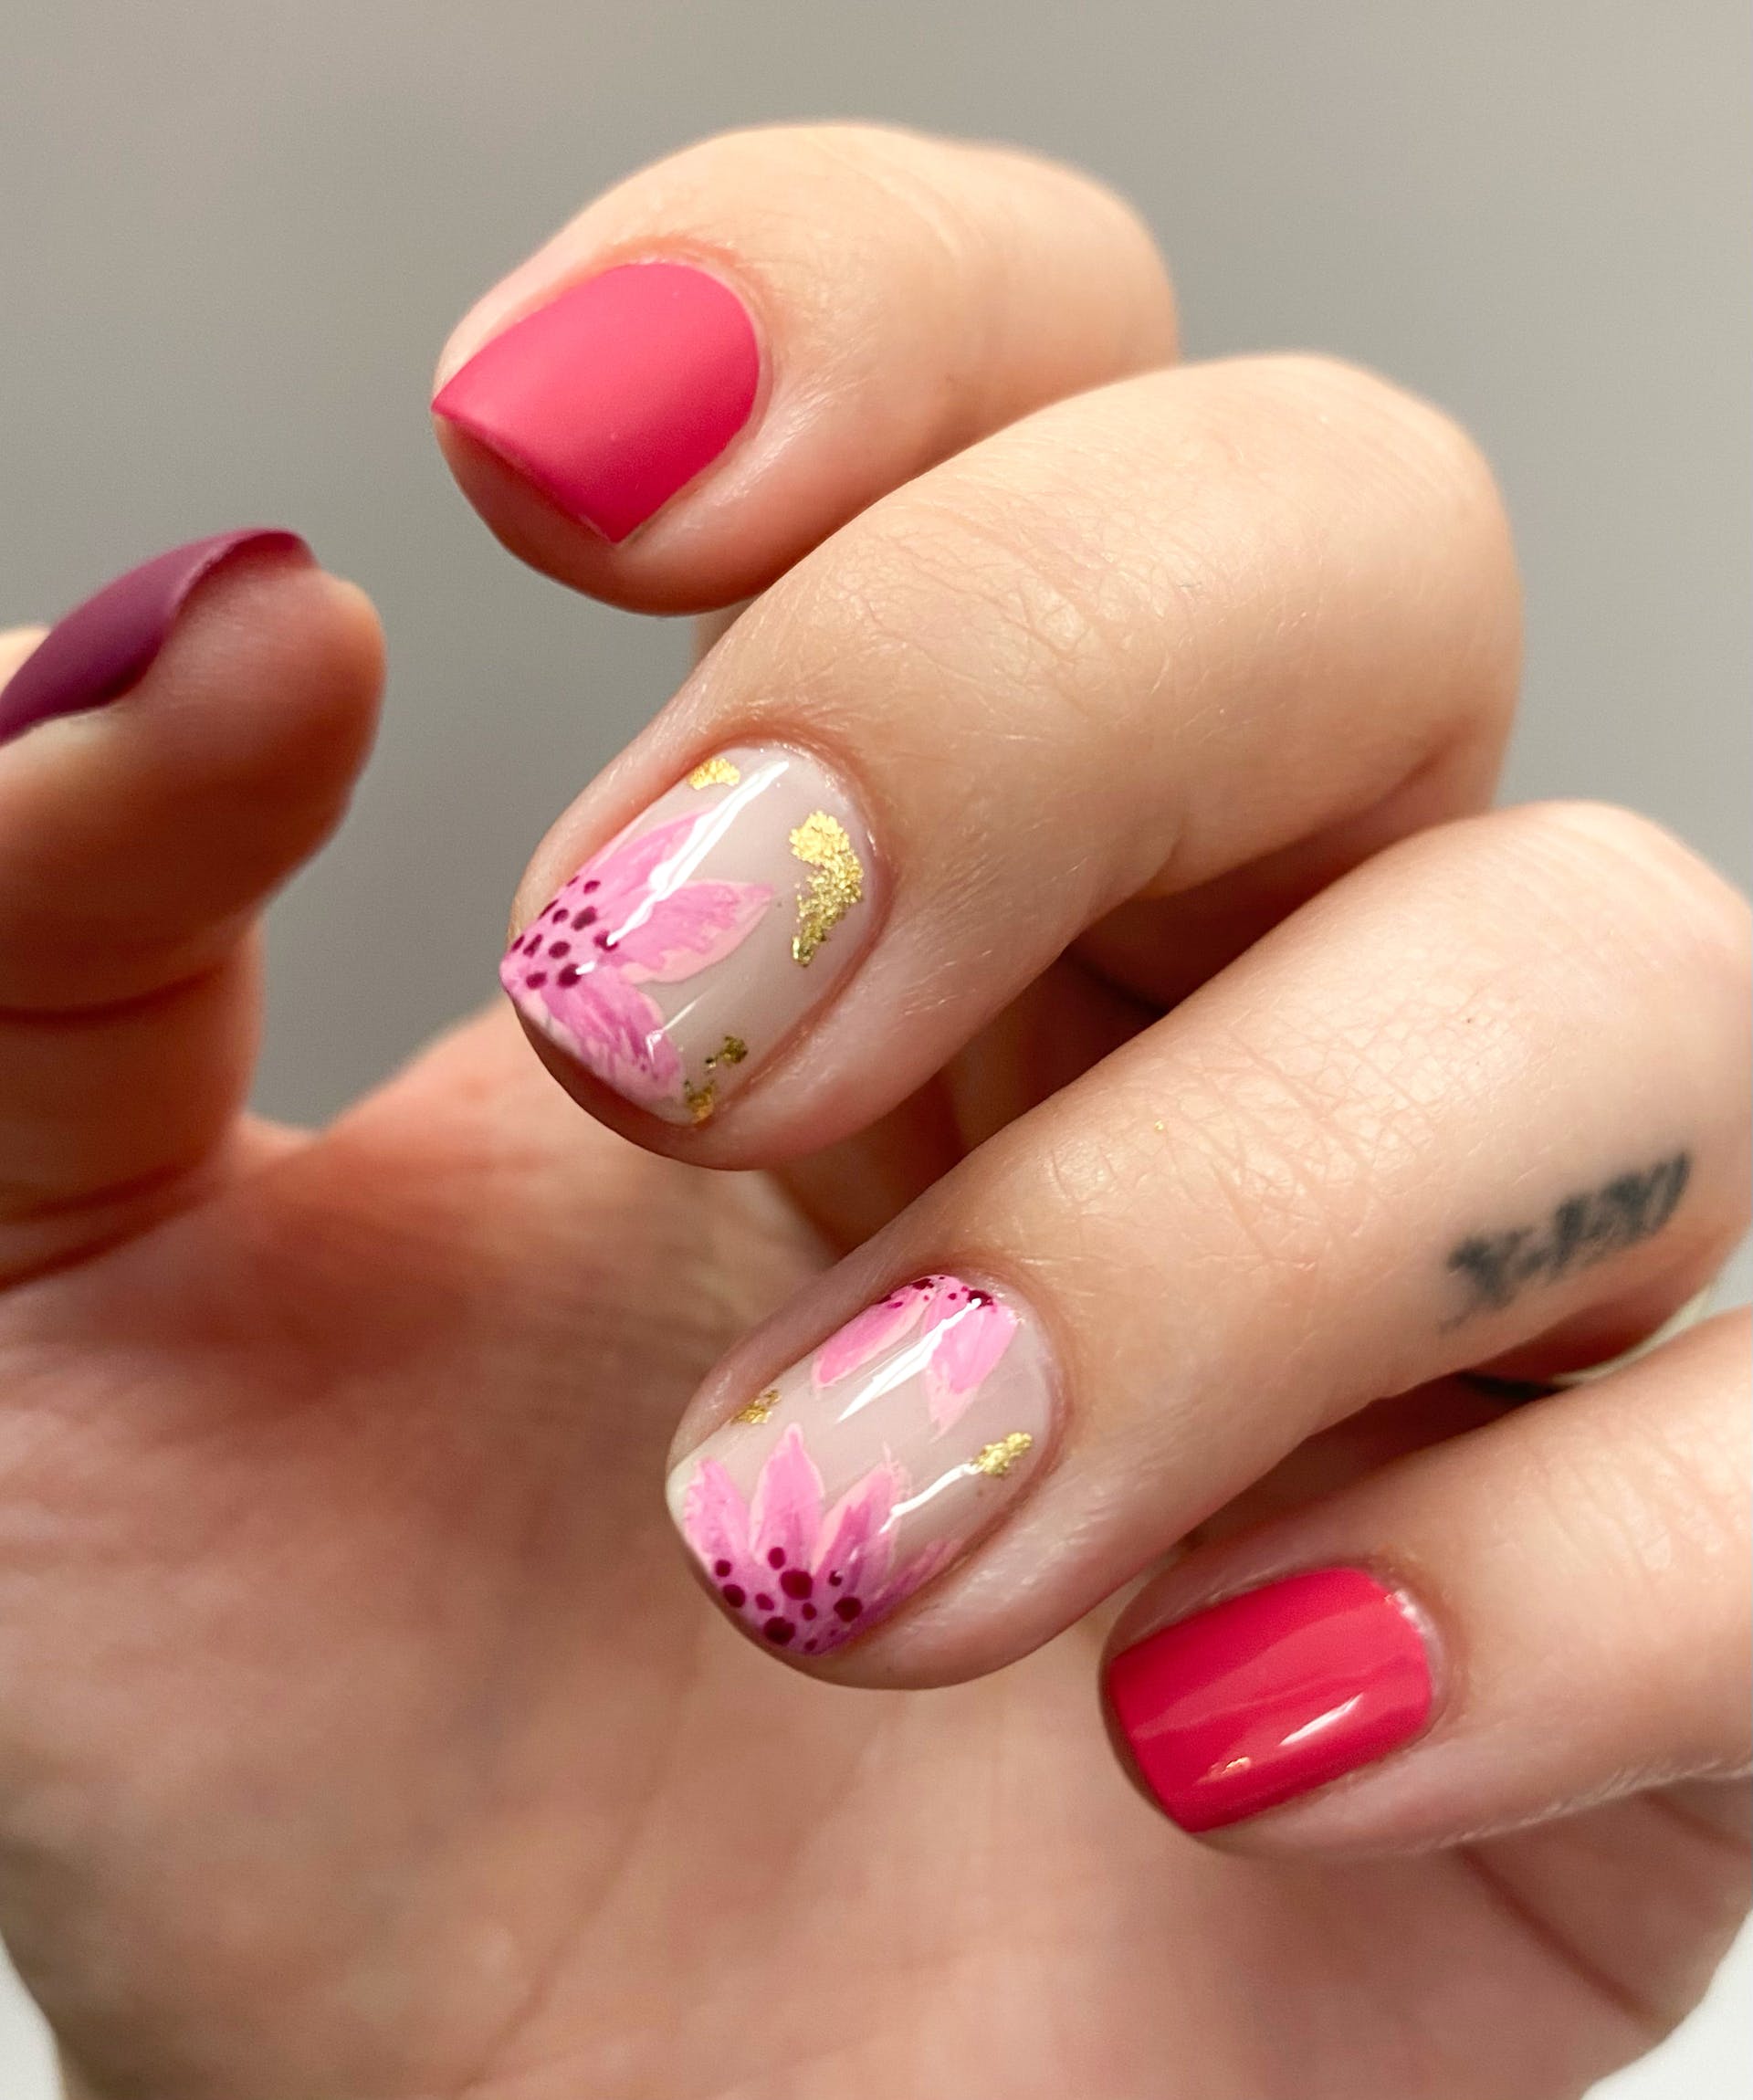 Pink floral nails with gold foil